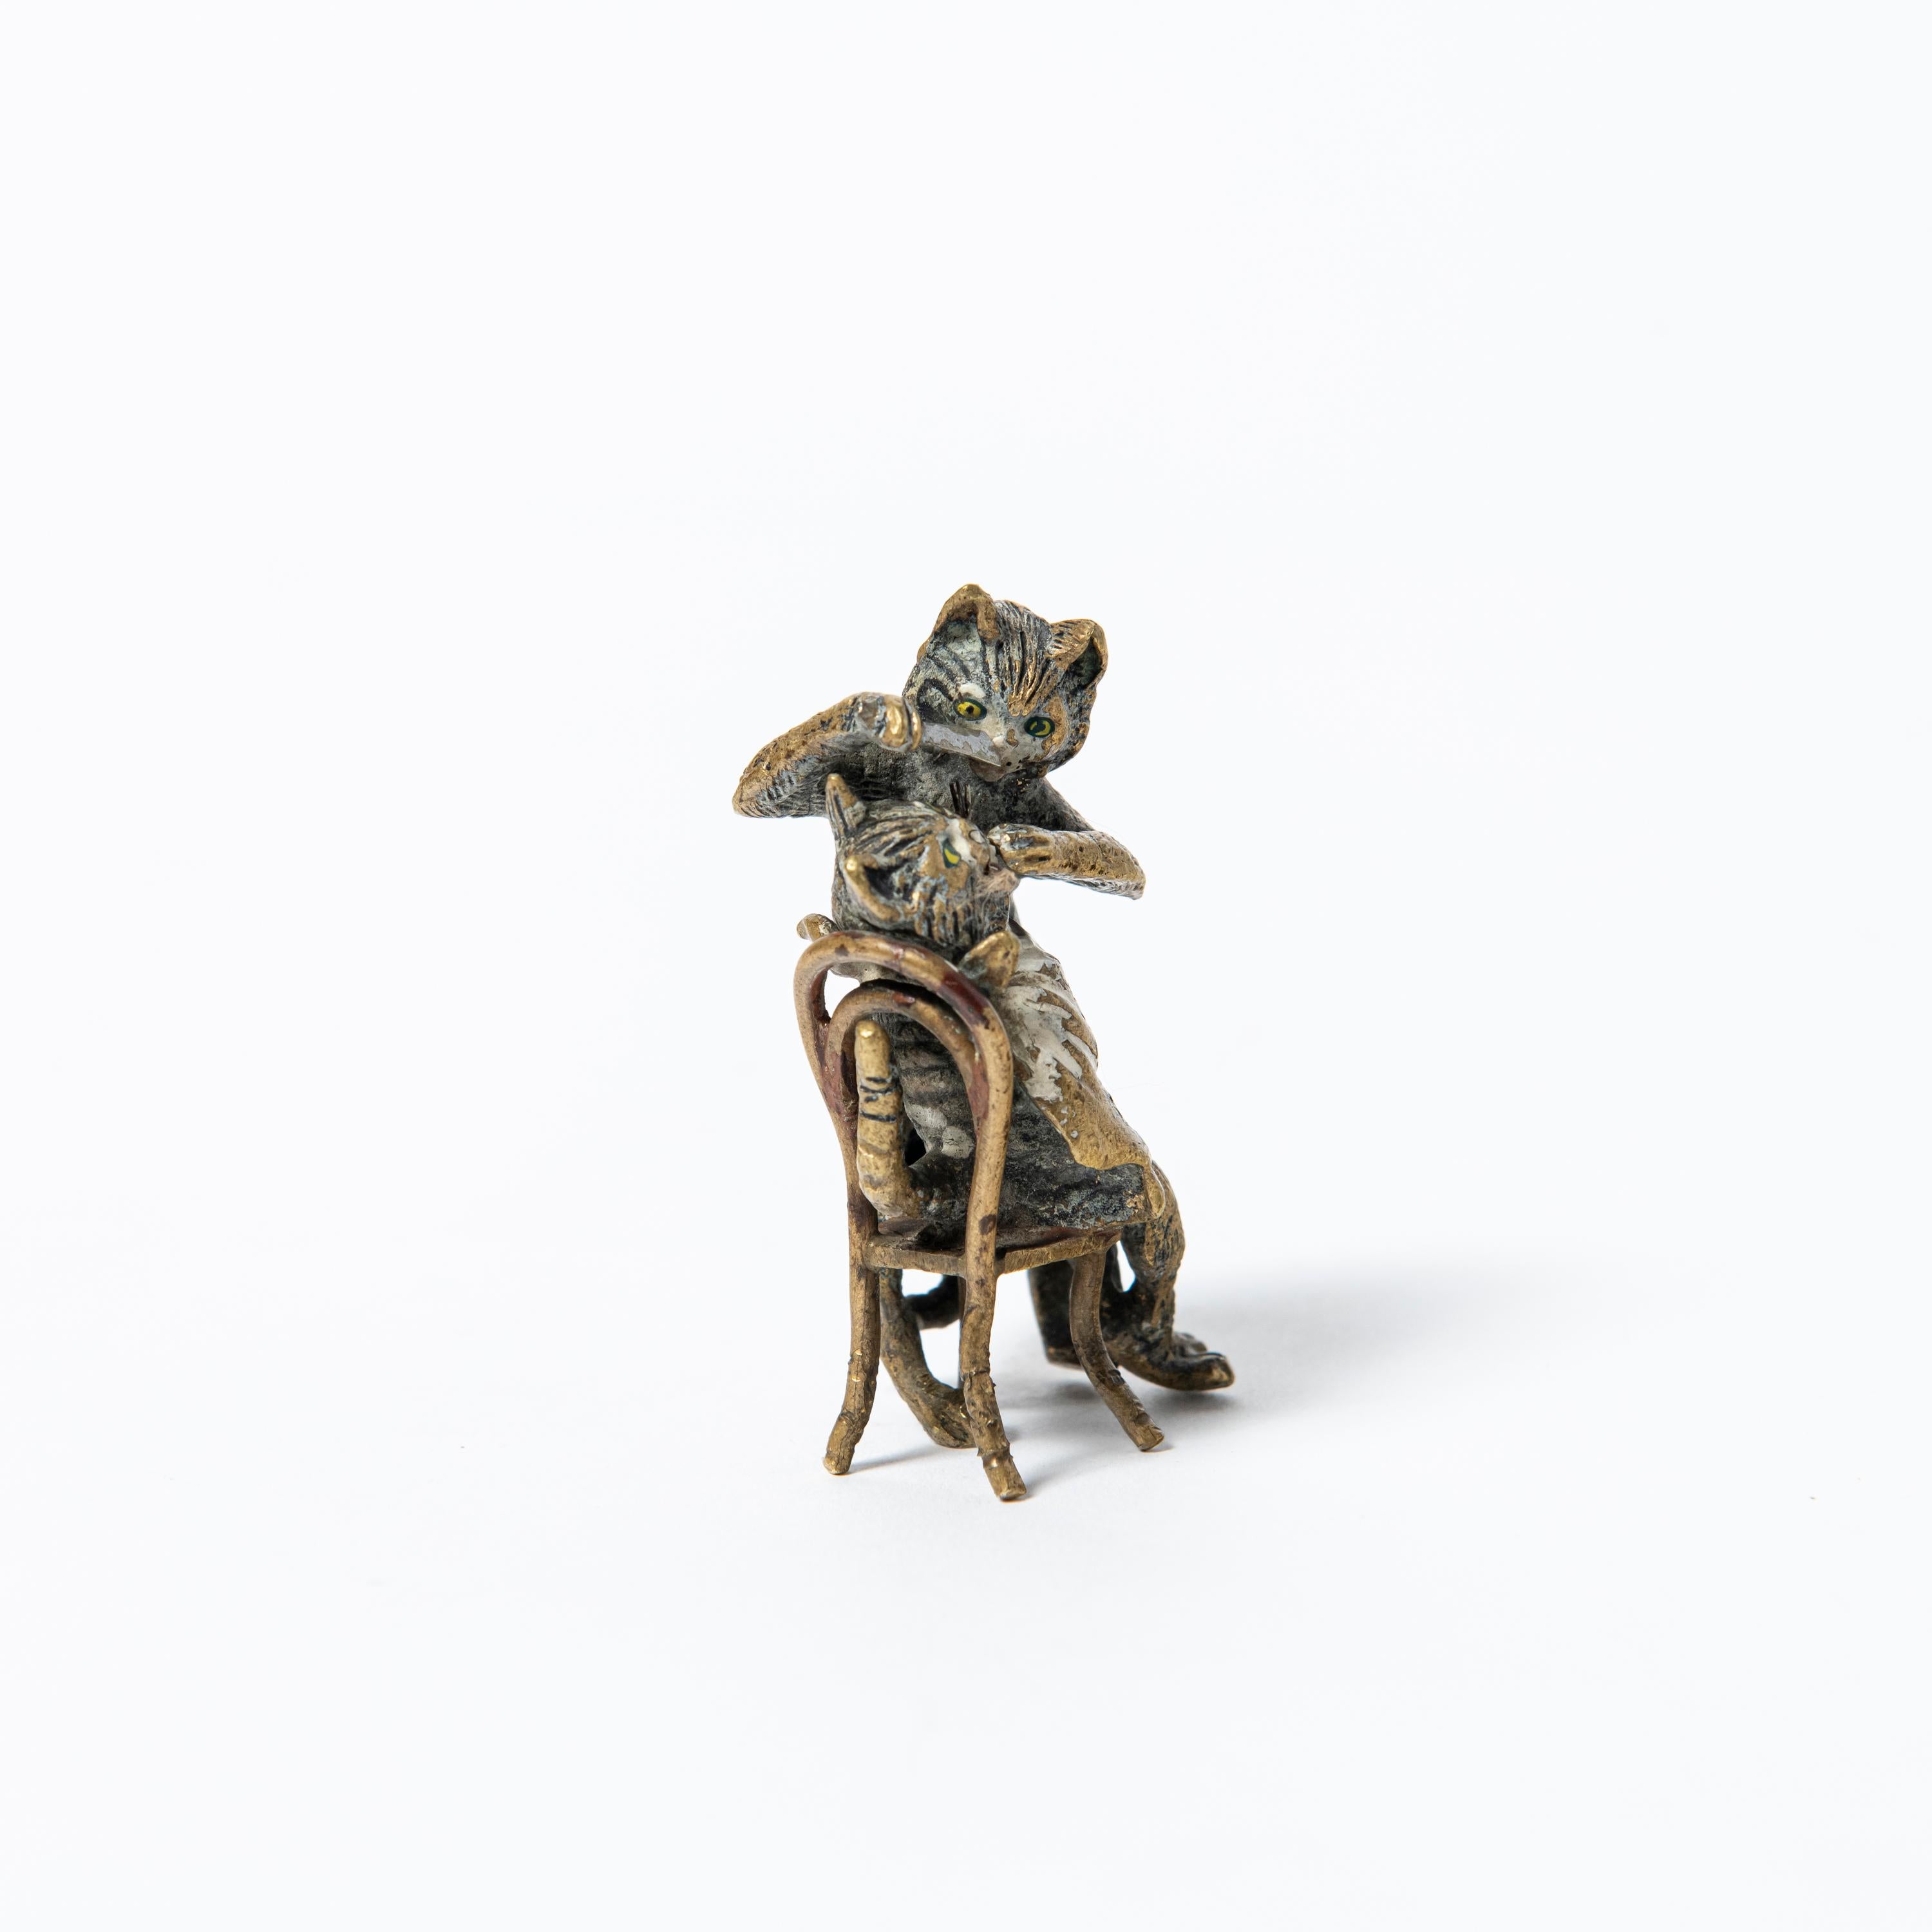 Cold-painted bronze cats sculpture attributed to Franz Bergmann. Austria, early 20th century.